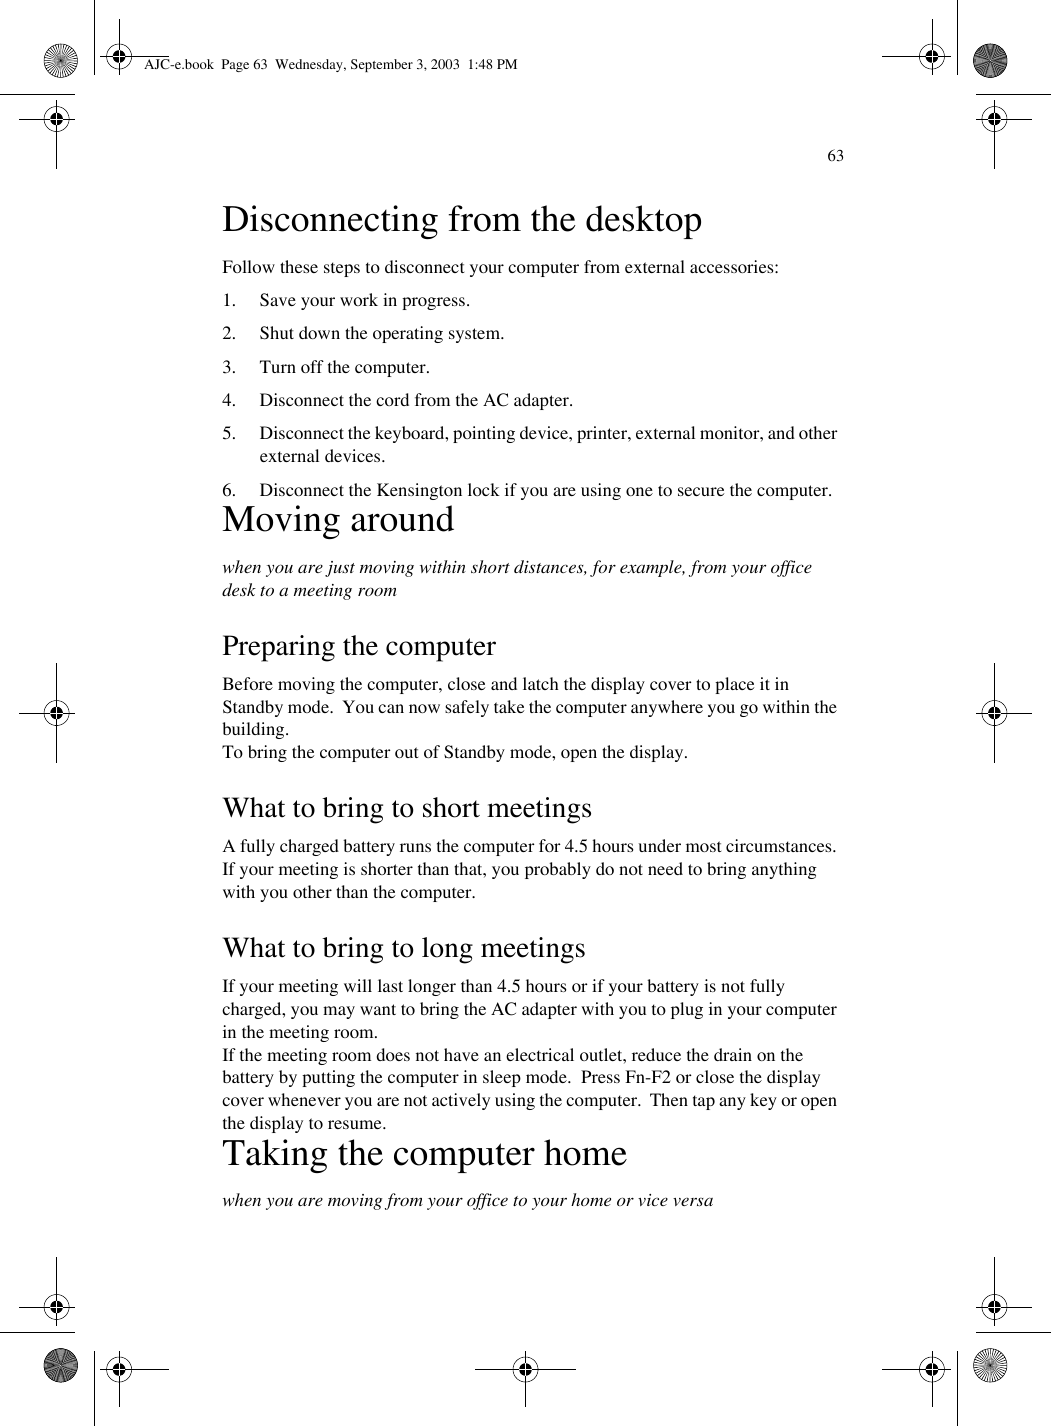 63Disconnecting from the desktopFollow these steps to disconnect your computer from external accessories:1. Save your work in progress.2. Shut down the operating system.3. Turn off the computer.4. Disconnect the cord from the AC adapter.5. Disconnect the keyboard, pointing device, printer, external monitor, and other external devices.6. Disconnect the Kensington lock if you are using one to secure the computer.Moving aroundwhen you are just moving within short distances, for example, from your office desk to a meeting roomPreparing the computerBefore moving the computer, close and latch the display cover to place it in Standby mode.  You can now safely take the computer anywhere you go within the building.To bring the computer out of Standby mode, open the display.What to bring to short meetingsA fully charged battery runs the computer for 4.5 hours under most circumstances. If your meeting is shorter than that, you probably do not need to bring anything with you other than the computer.What to bring to long meetingsIf your meeting will last longer than 4.5 hours or if your battery is not fully charged, you may want to bring the AC adapter with you to plug in your computer in the meeting room.If the meeting room does not have an electrical outlet, reduce the drain on the battery by putting the computer in sleep mode.  Press Fn-F2 or close the display cover whenever you are not actively using the computer.  Then tap any key or open the display to resume.Taking the computer homewhen you are moving from your office to your home or vice versaAJC-e.book  Page 63  Wednesday, September 3, 2003  1:48 PM